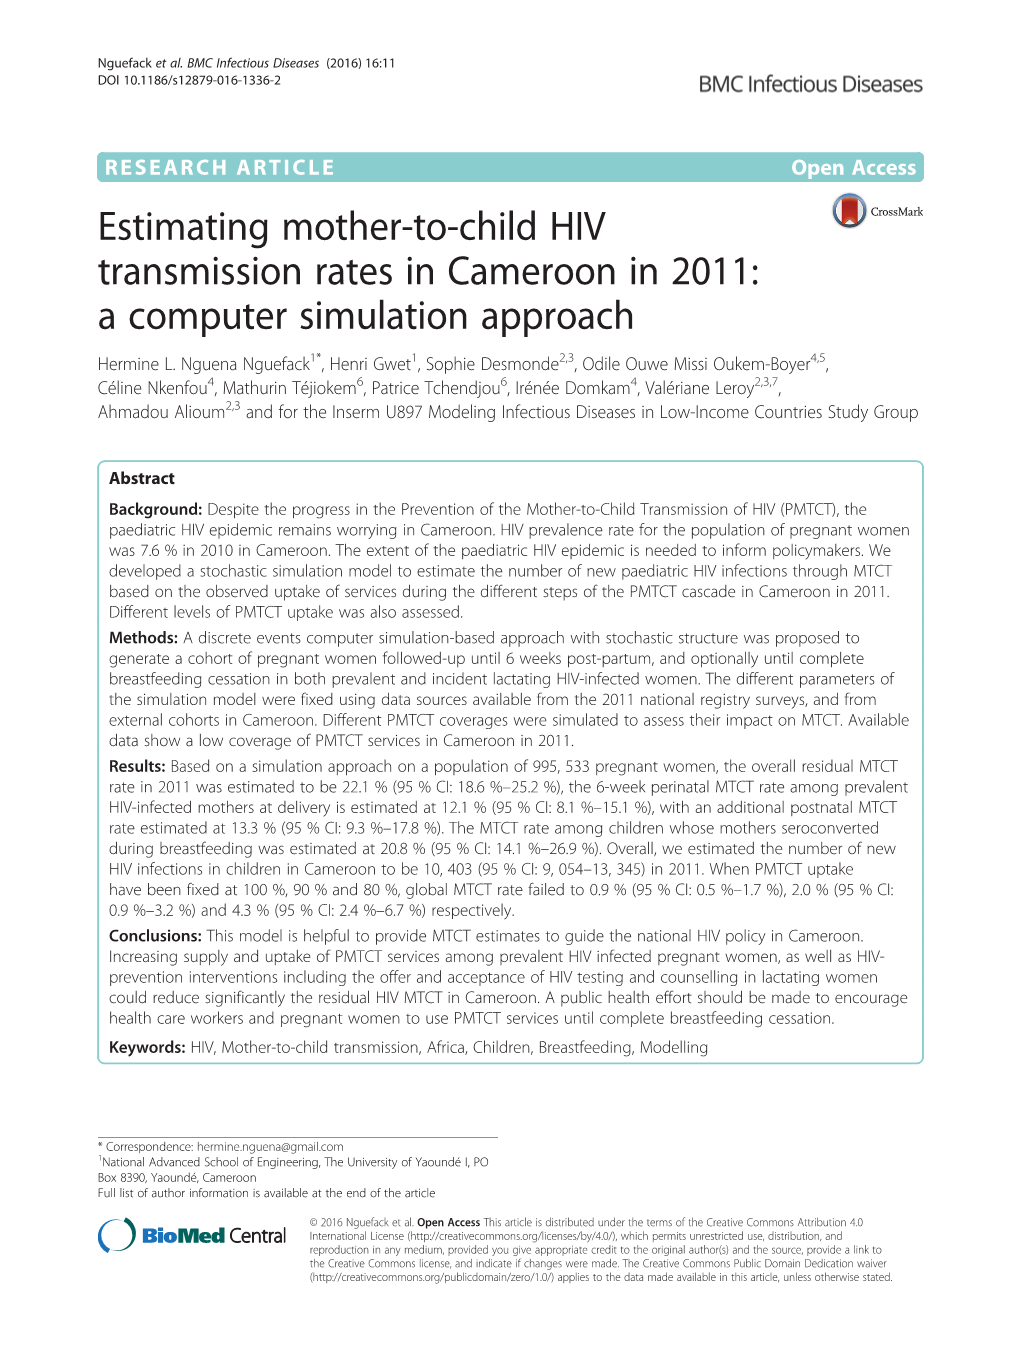 Estimating Mother-To-Child HIV Transmission Rates in Cameroon in 2011: a Computer Simulation Approach Hermine L